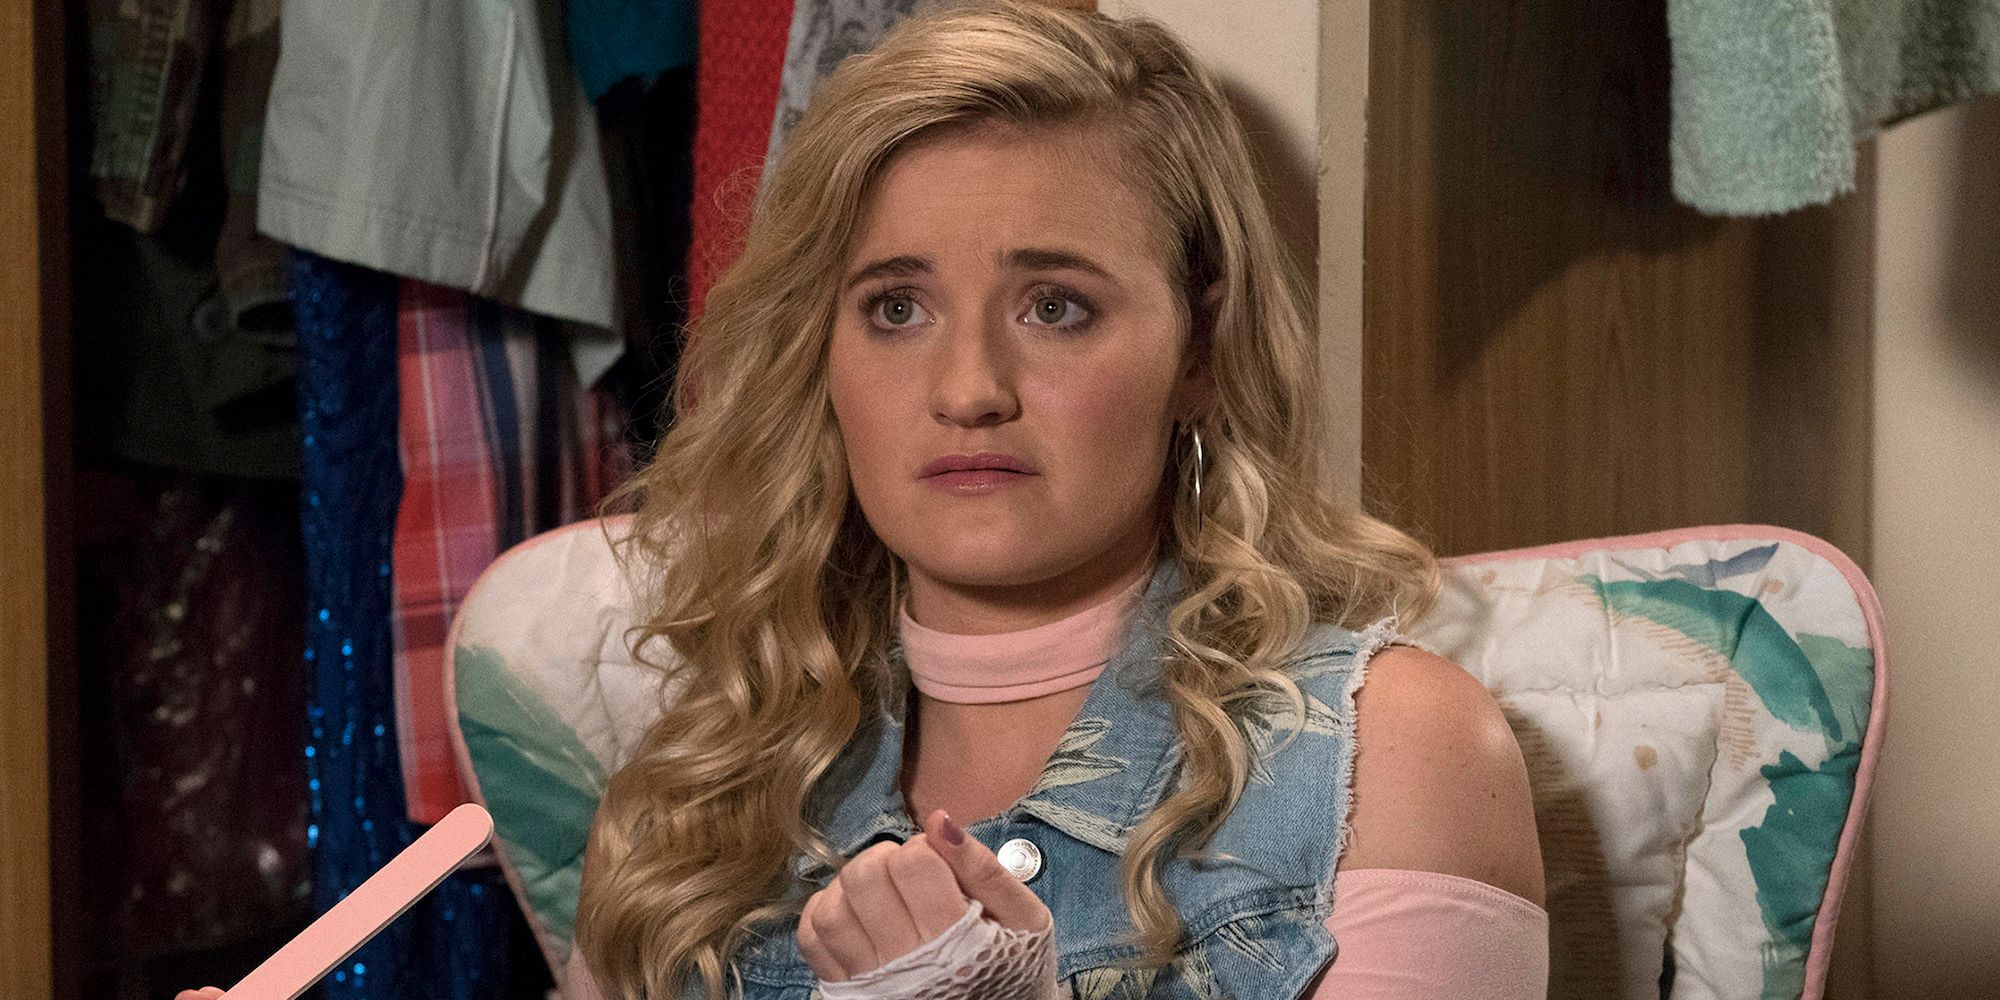 AJ Michalka as Lainey Lewis on The Goldbergs looking concerned